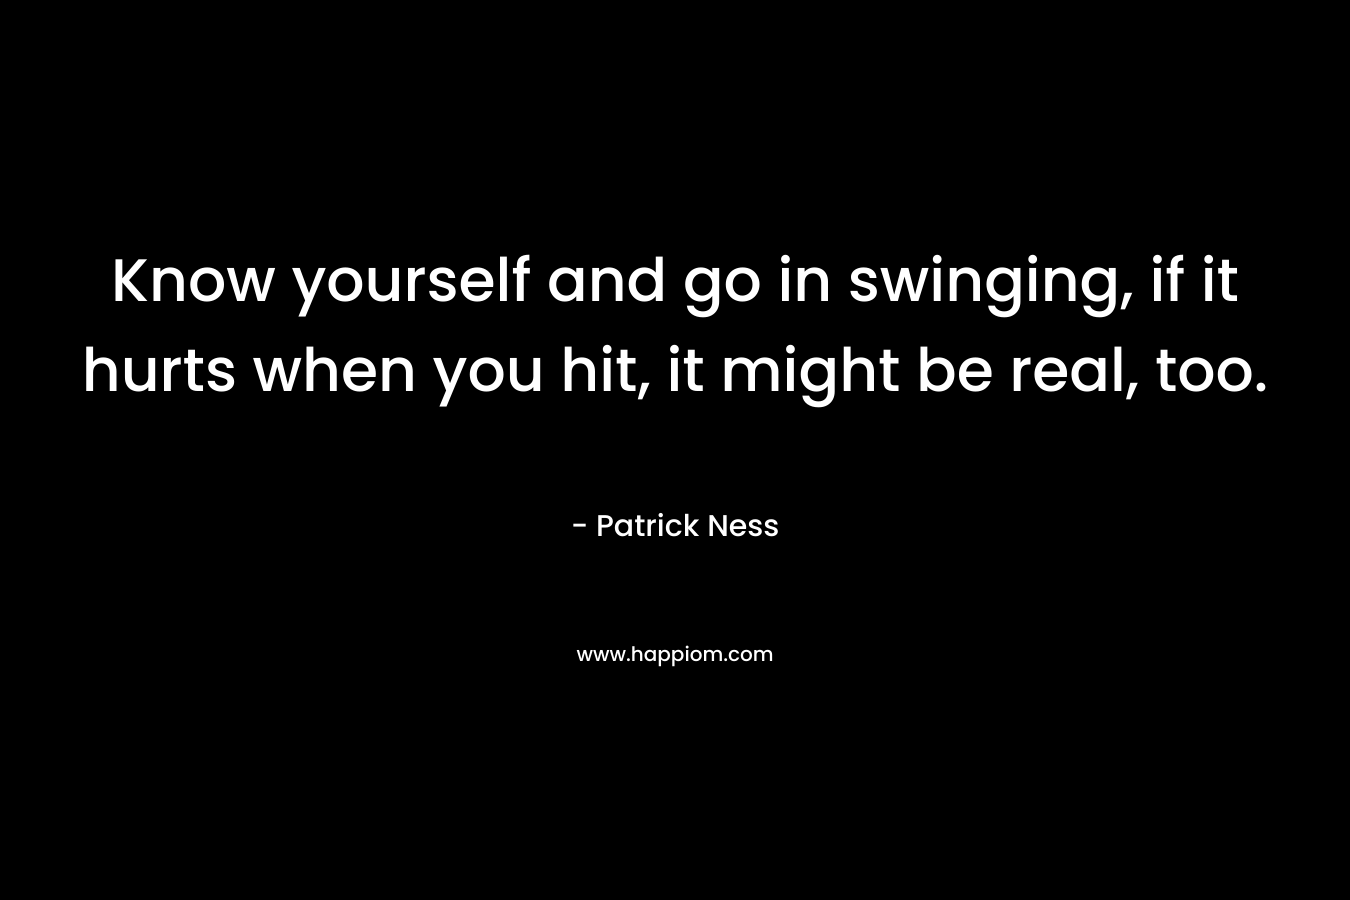 Know yourself and go in swinging, if it hurts when you hit, it might be real, too.